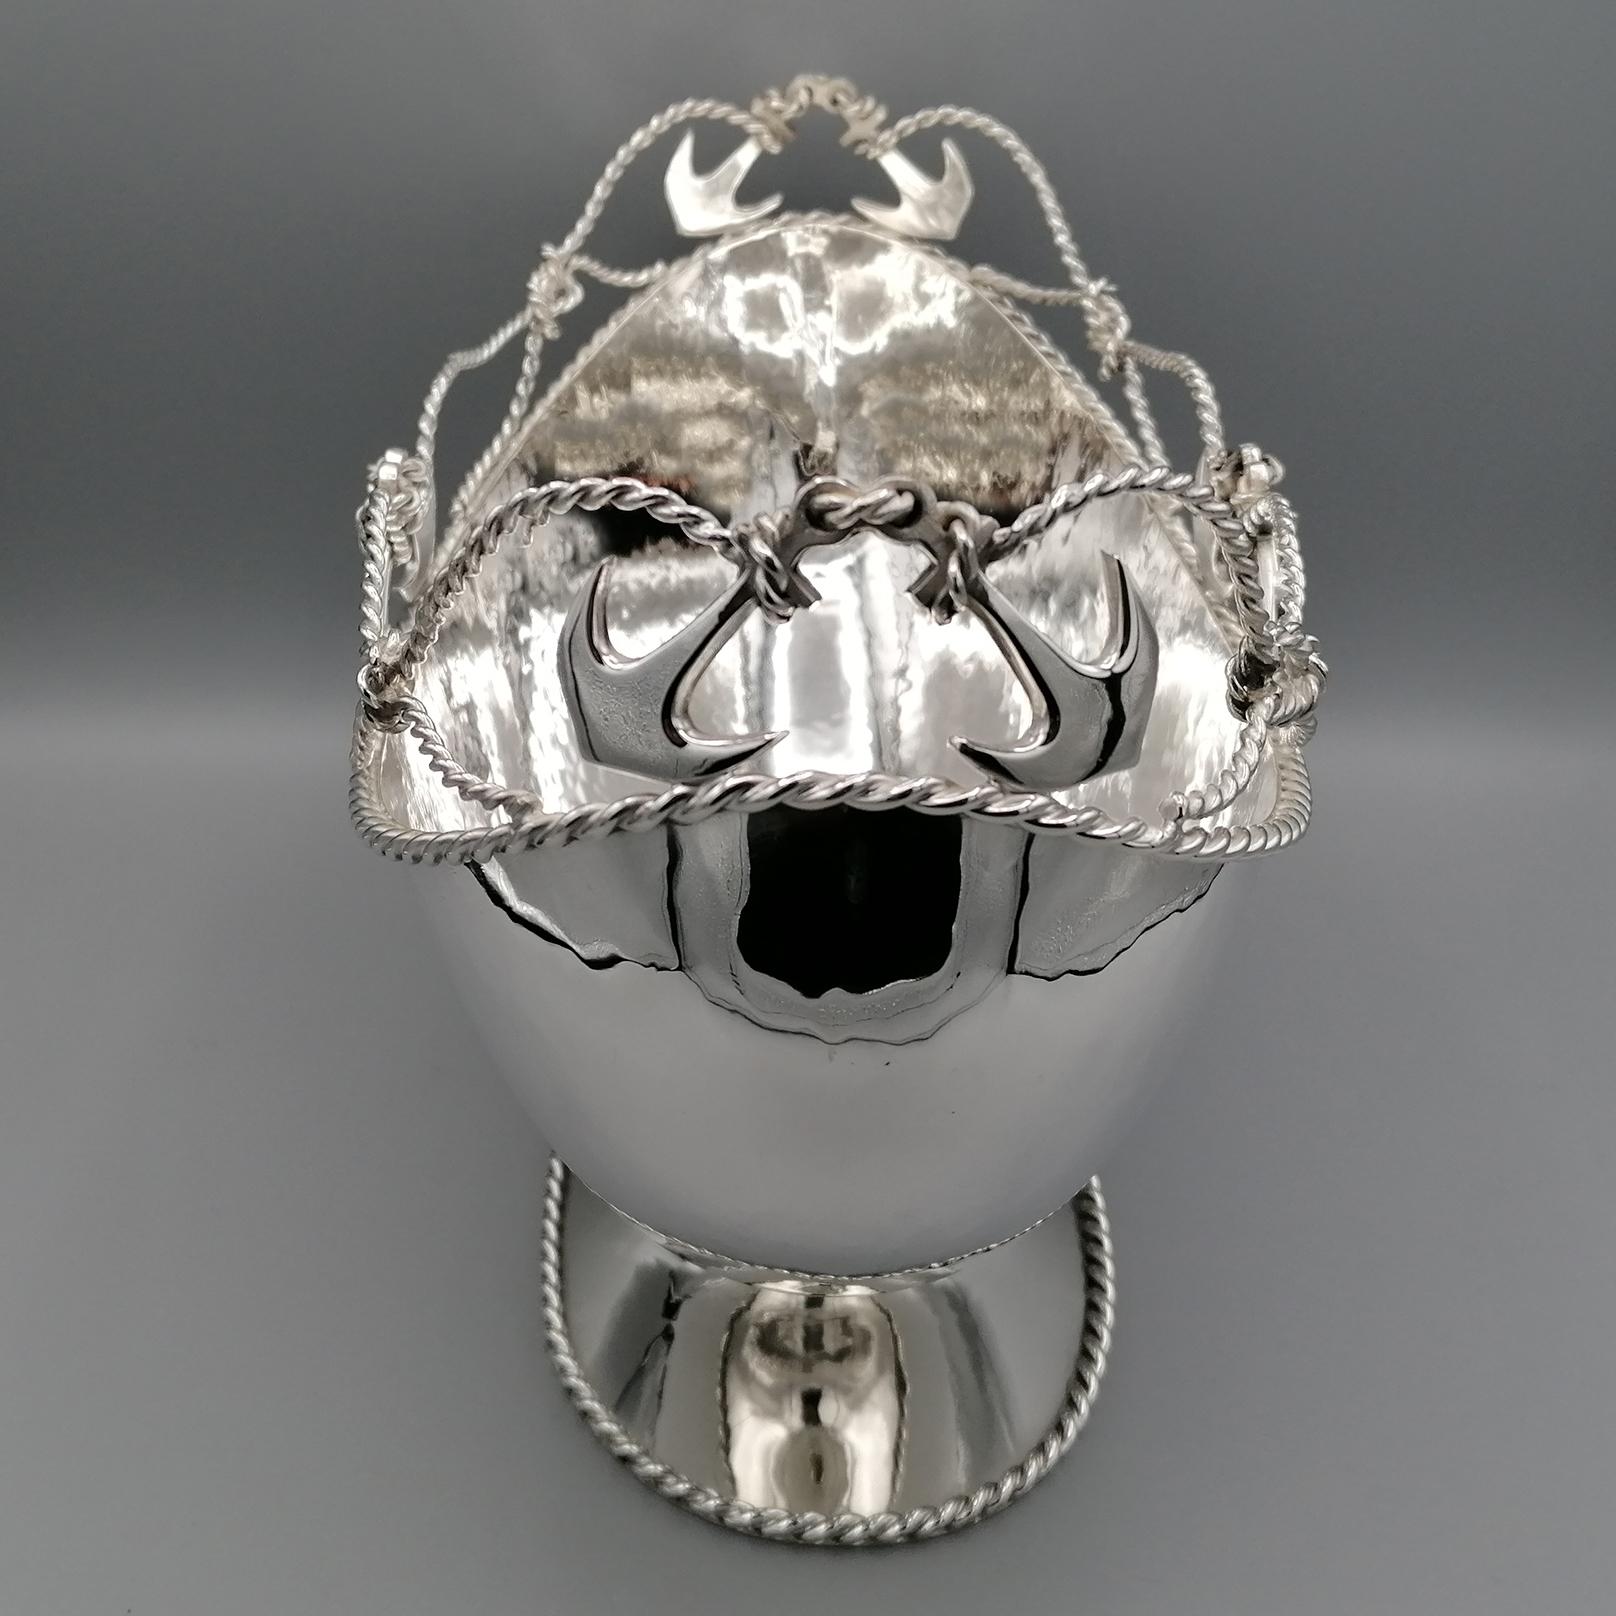 20th Century Italian Solid Silver Oval Centrepiece 